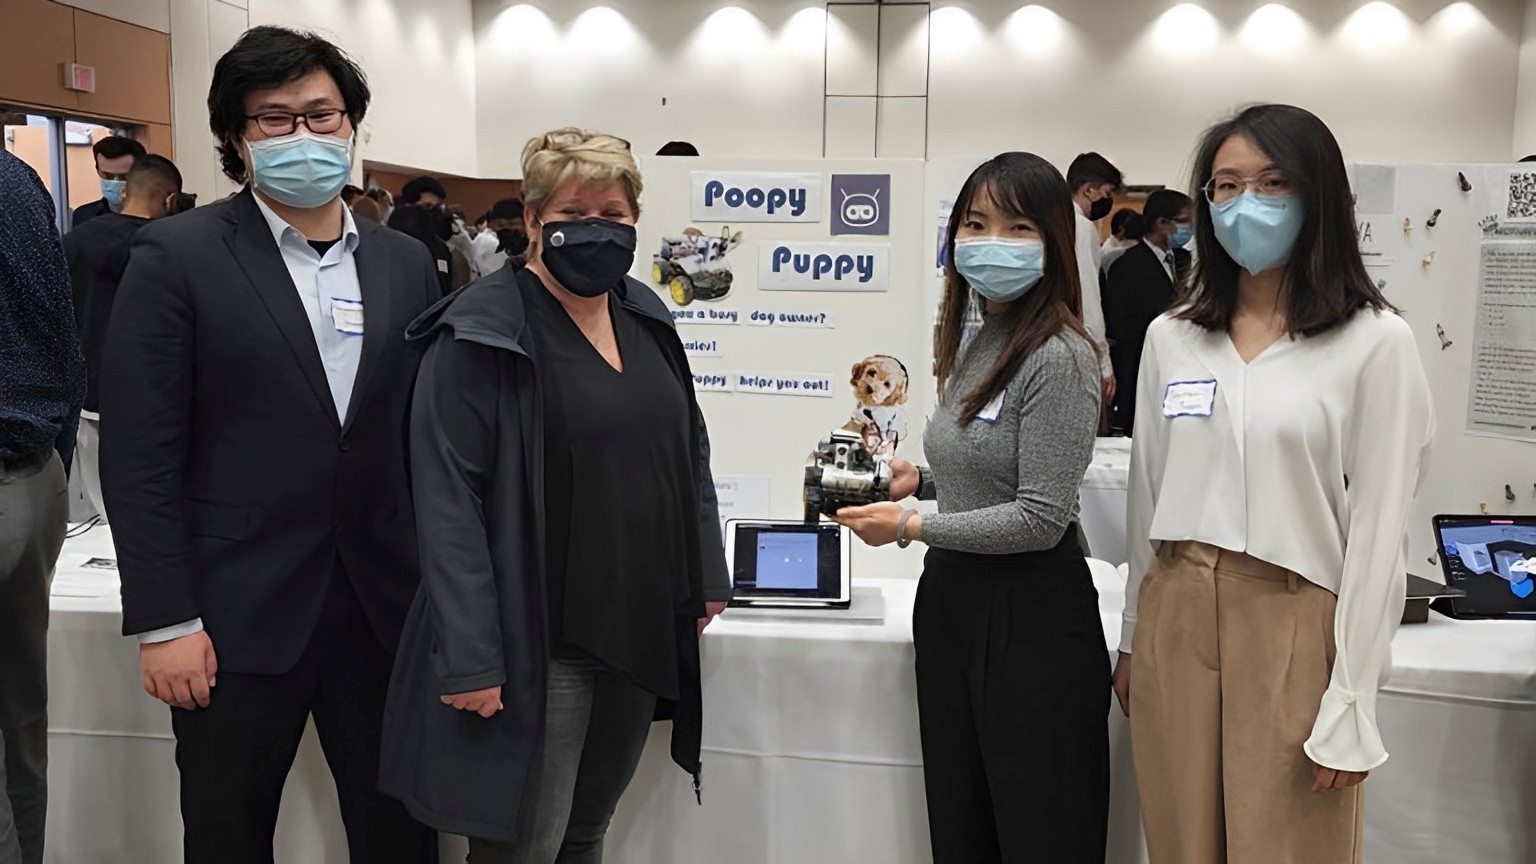 Heather Sheardown poses with the Poopy Puppy Capstone group. One member holds a robot that can find your pets excrement.